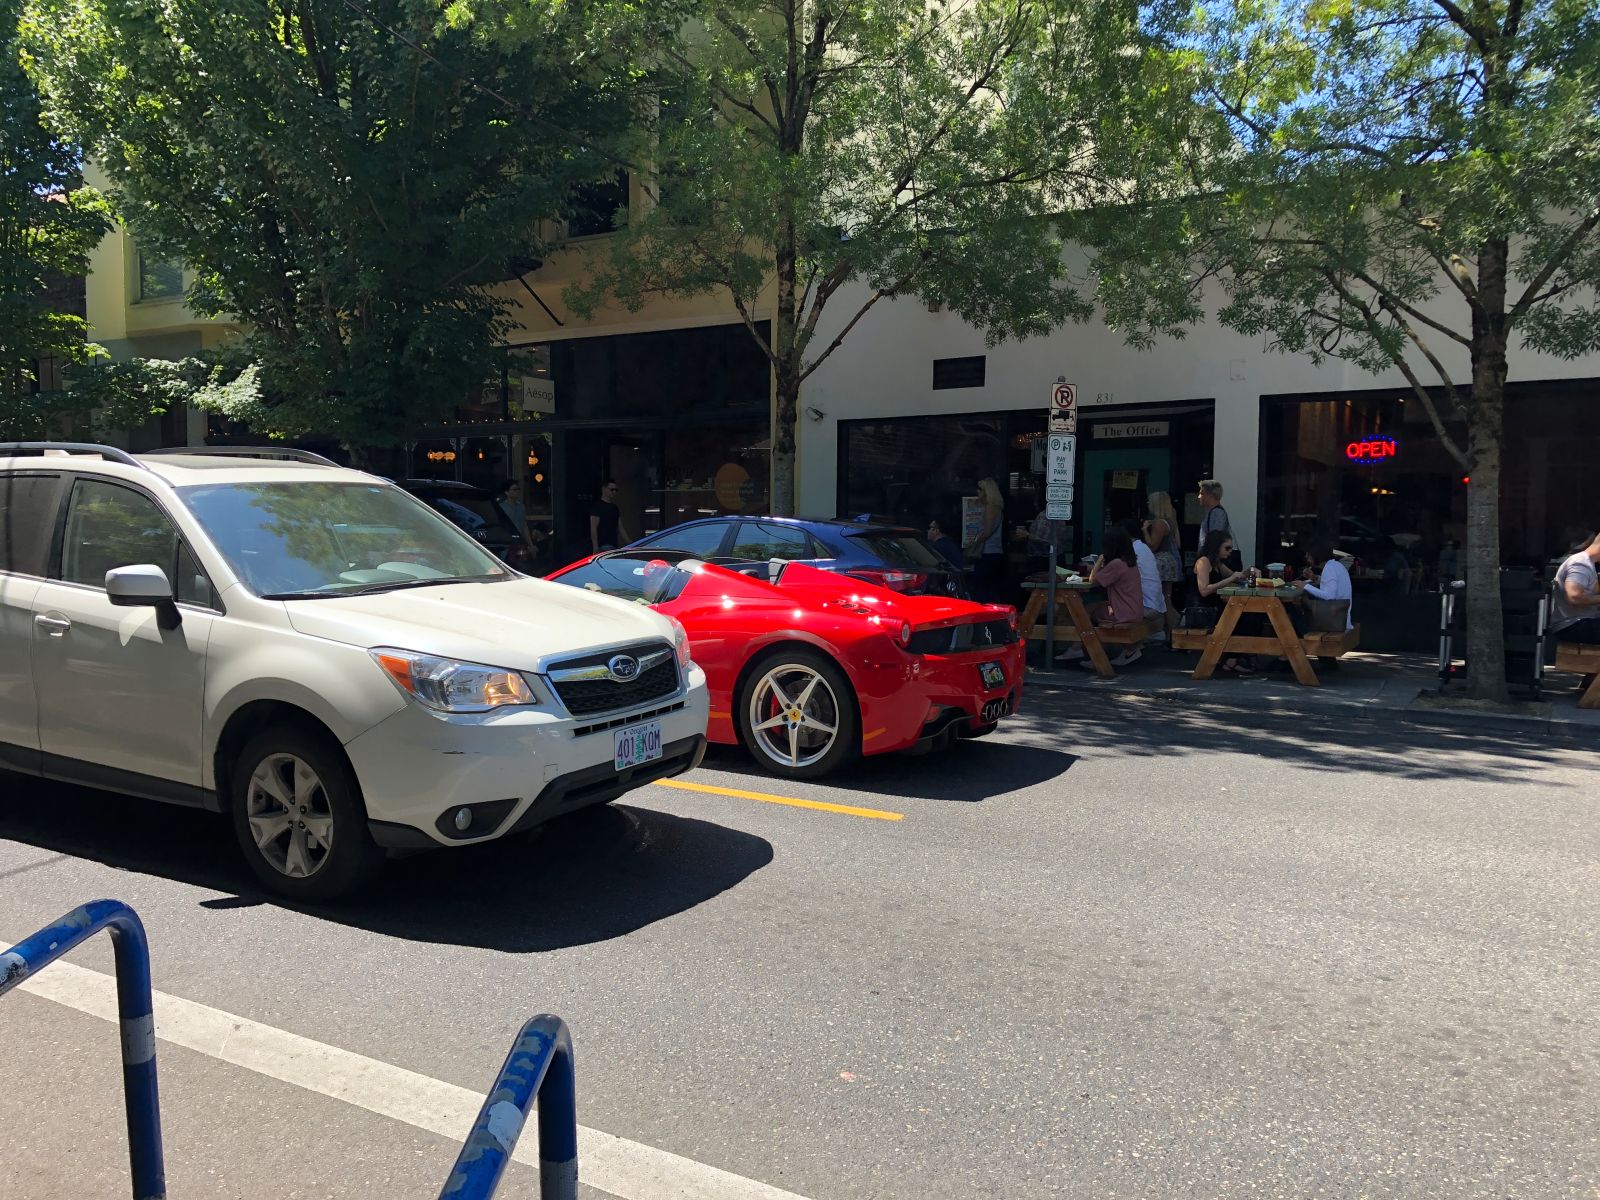 458 Spider, and yes, the driver is wearing a matching Ferrari hat.